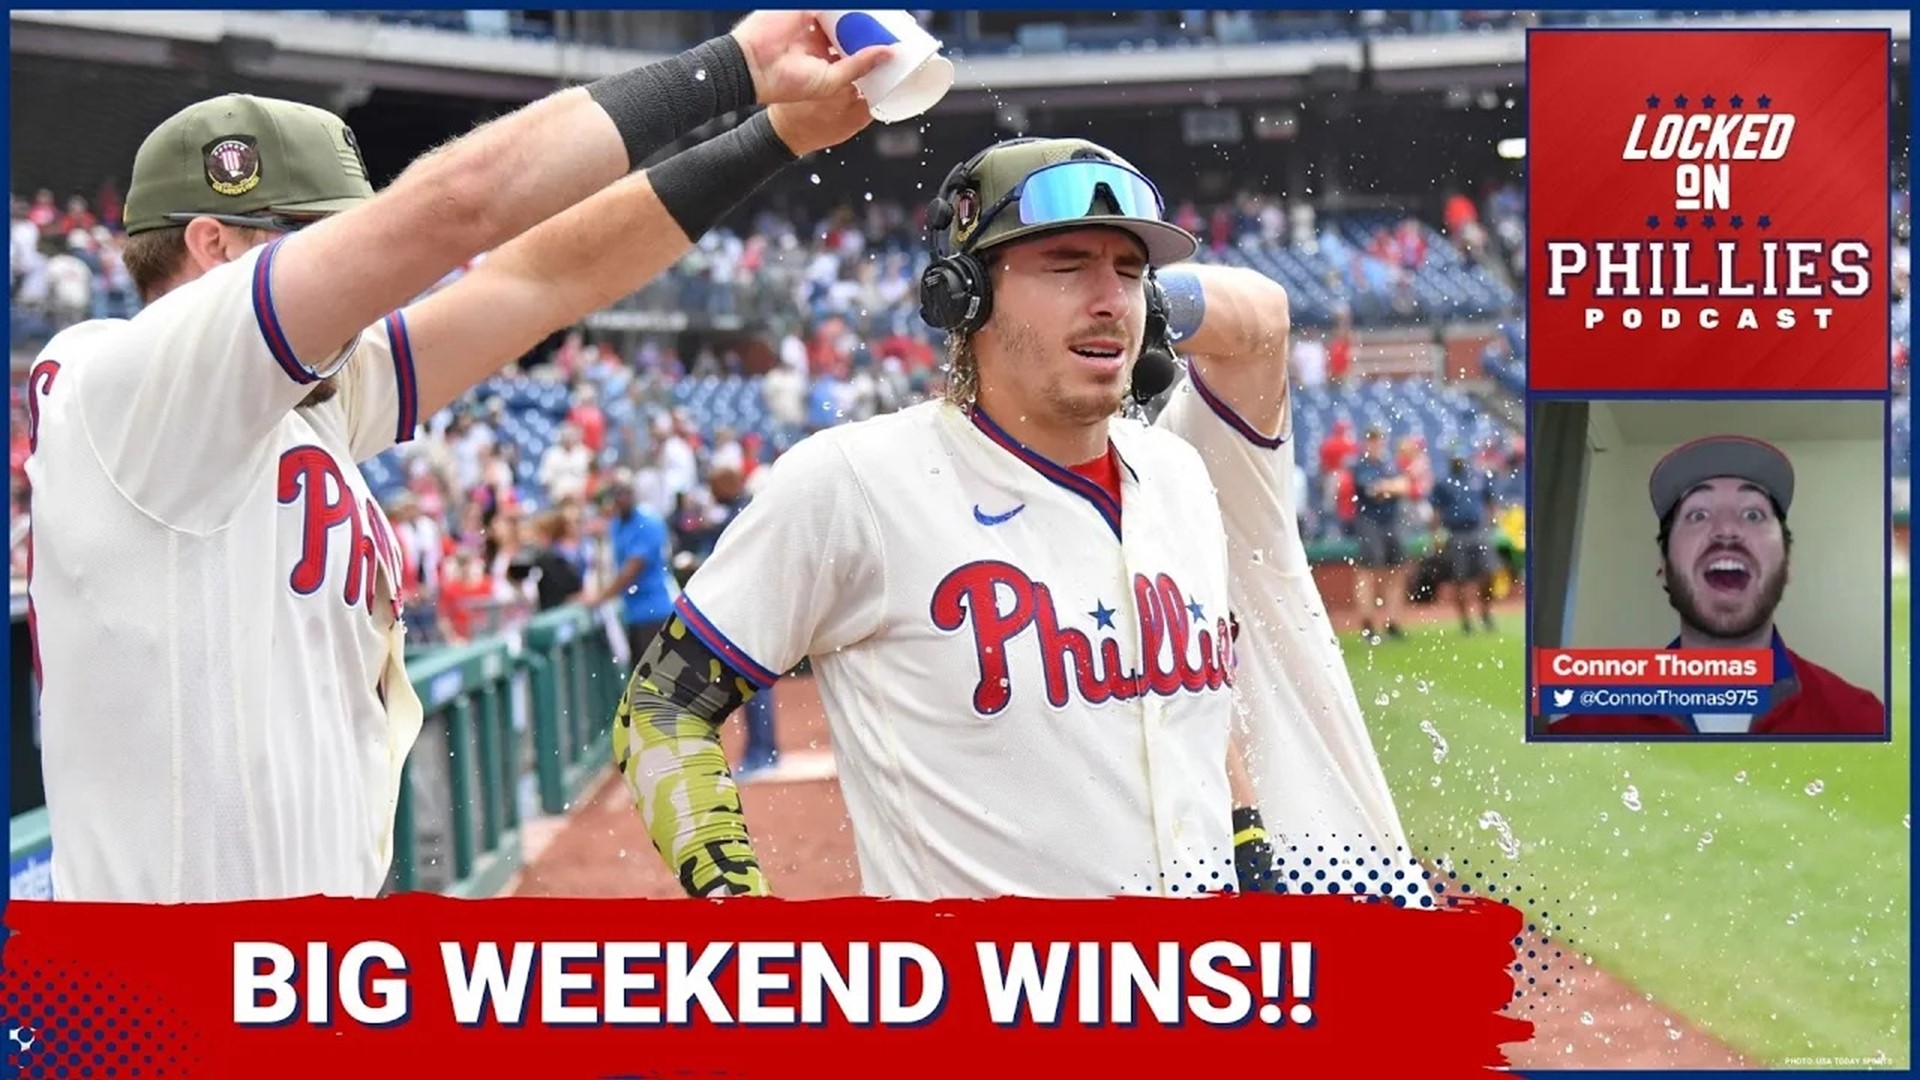 In today's episode, Connor discusses the Philadelphia Phillies' series win over the Chicago Cubs, including an offensive outburst on Saturday.